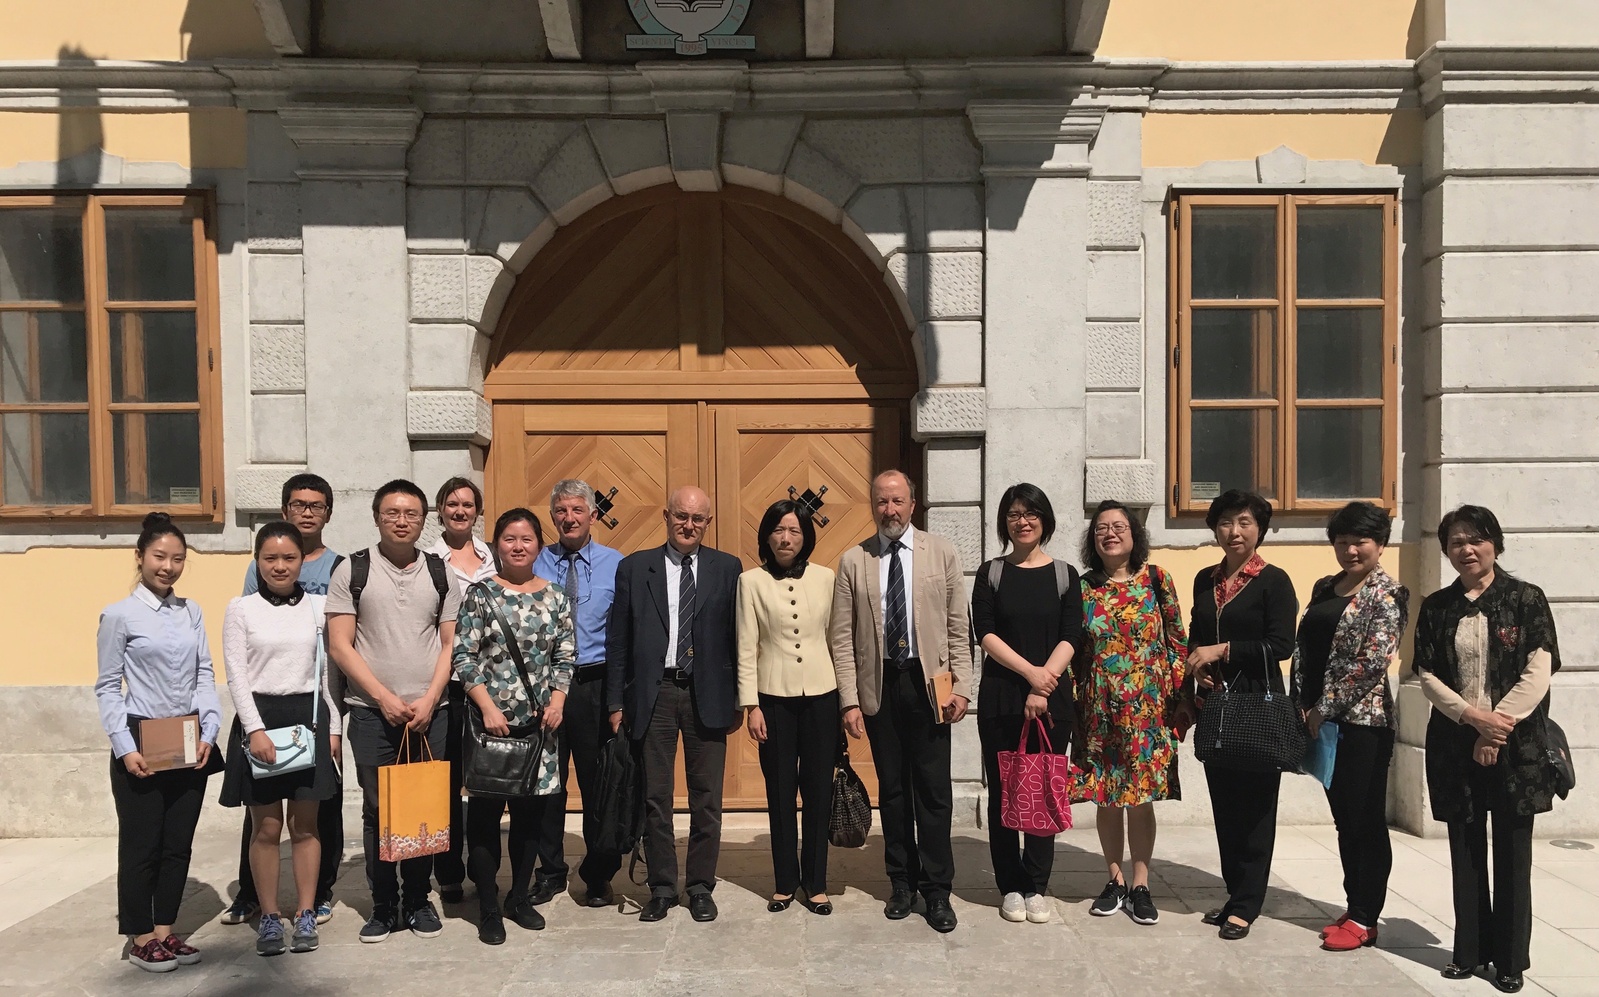 The Shanghai Women's Federation pays a visit to the University of Nova Gorica